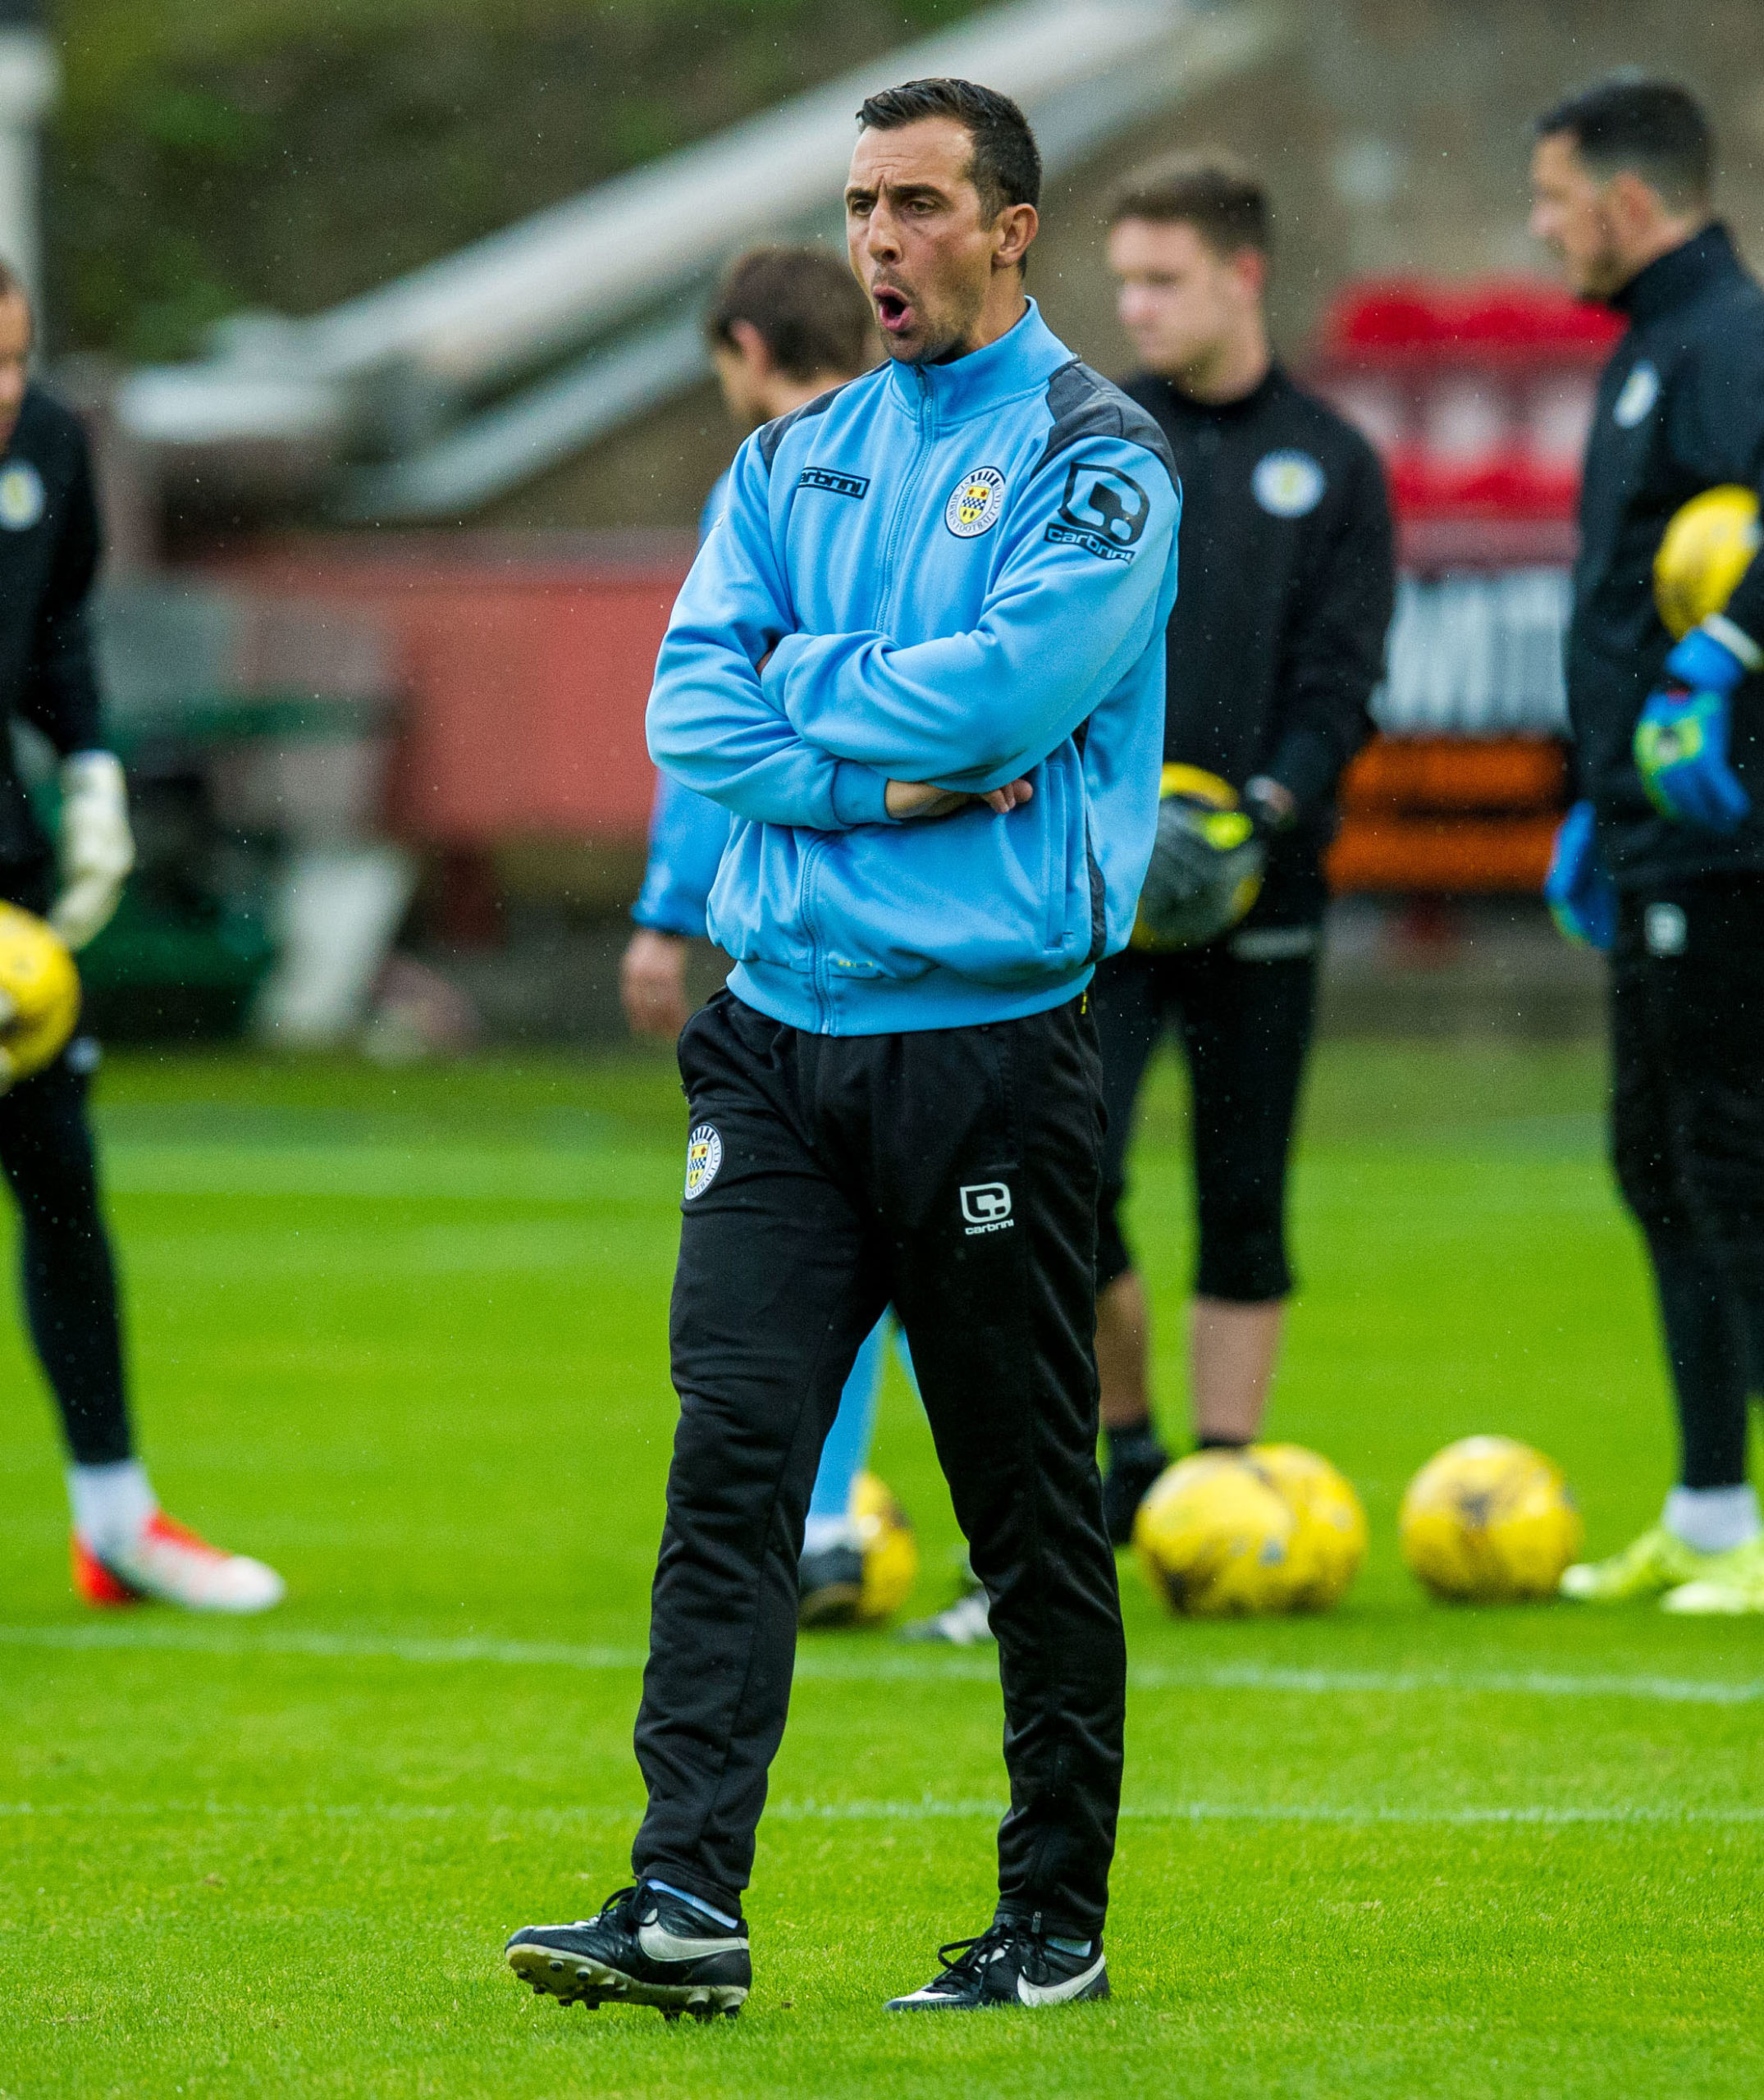 Allan McManus during his time as St Mirren's interim manager in 2016